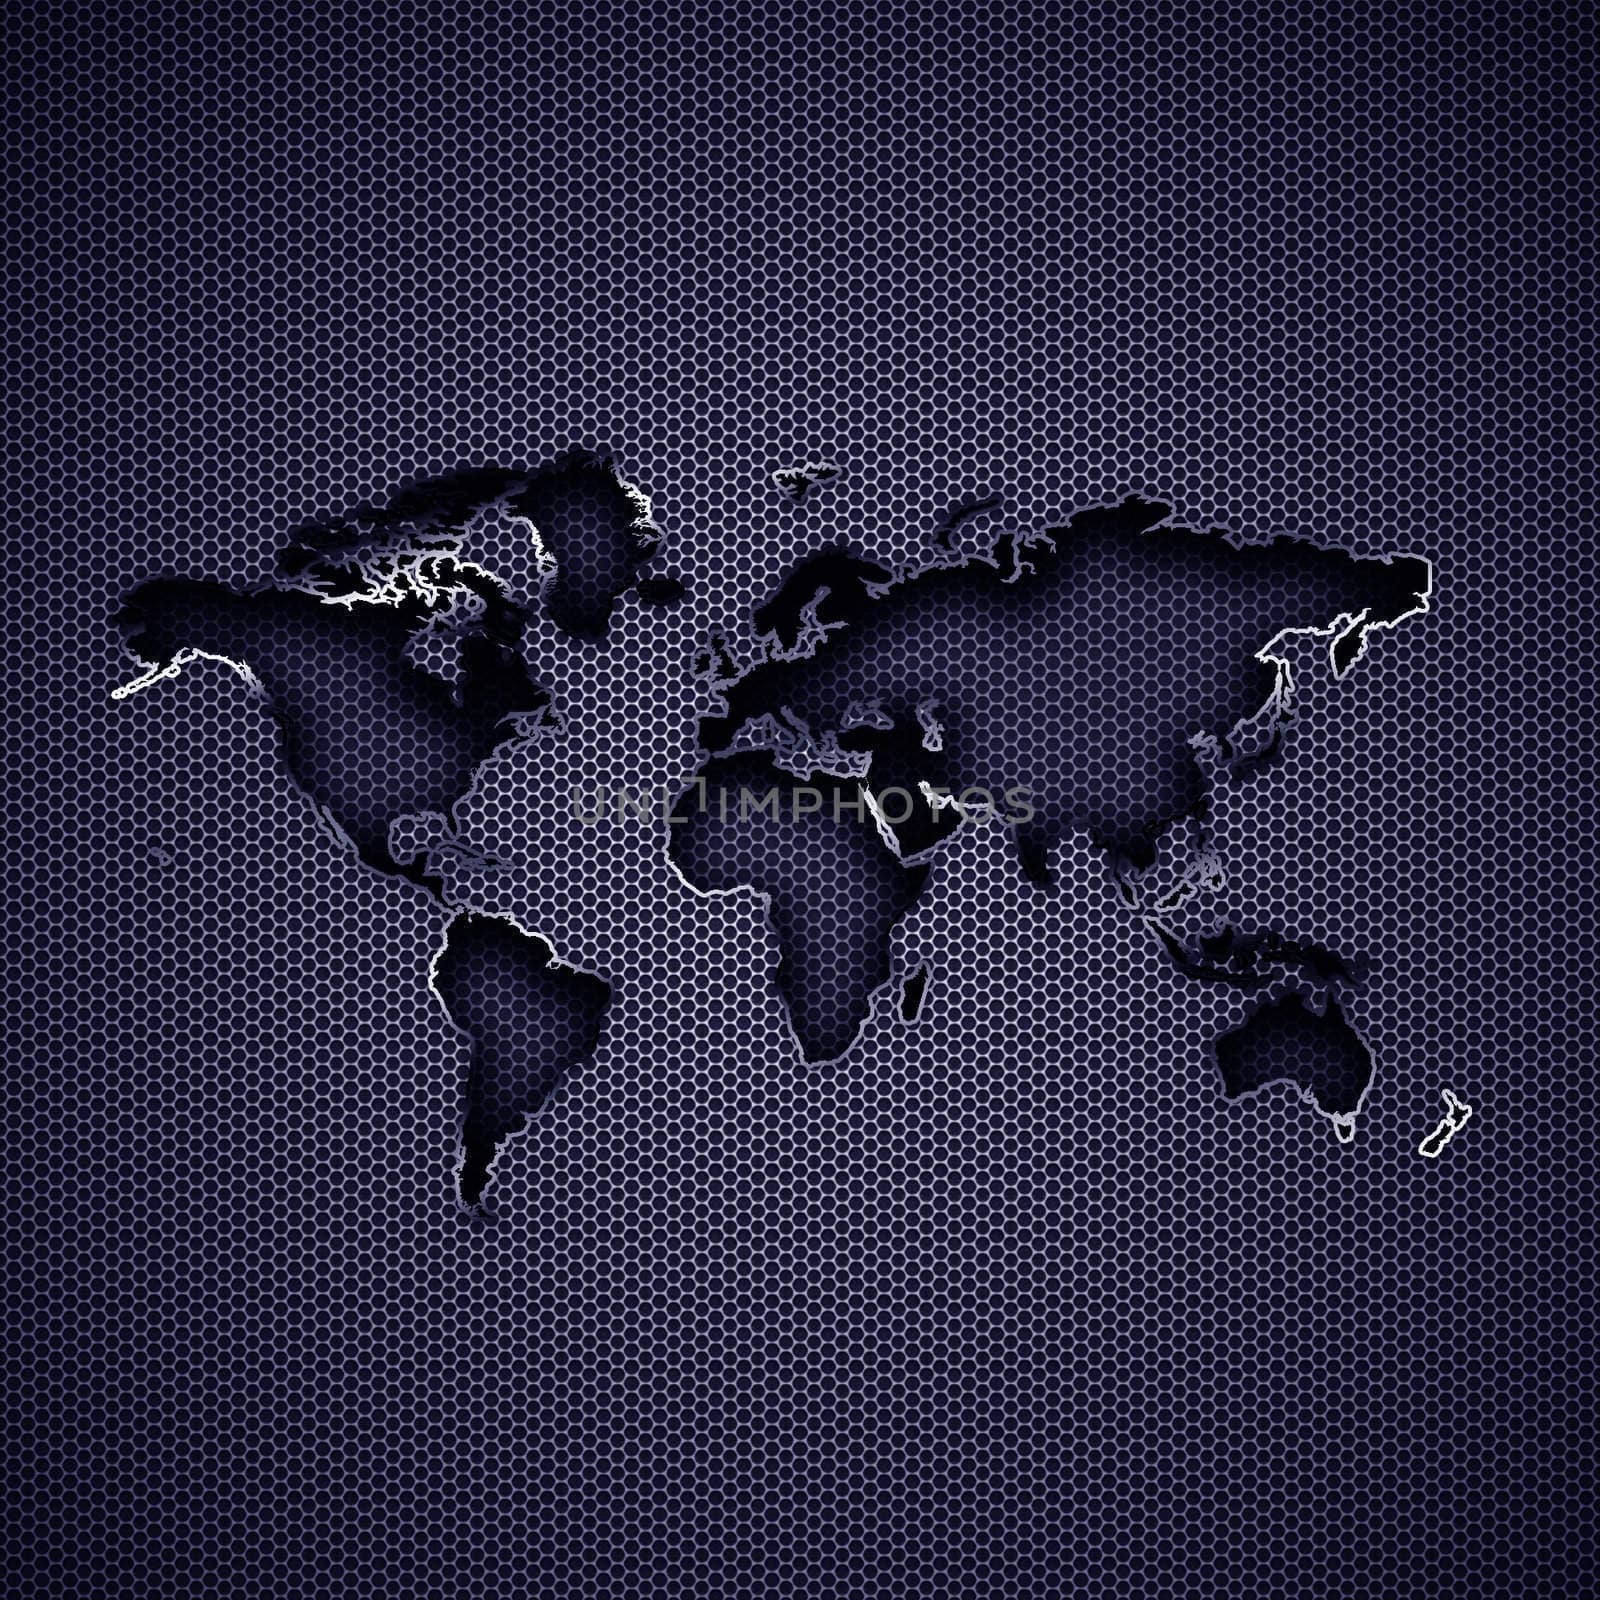 World map with metal background. High resolution image.